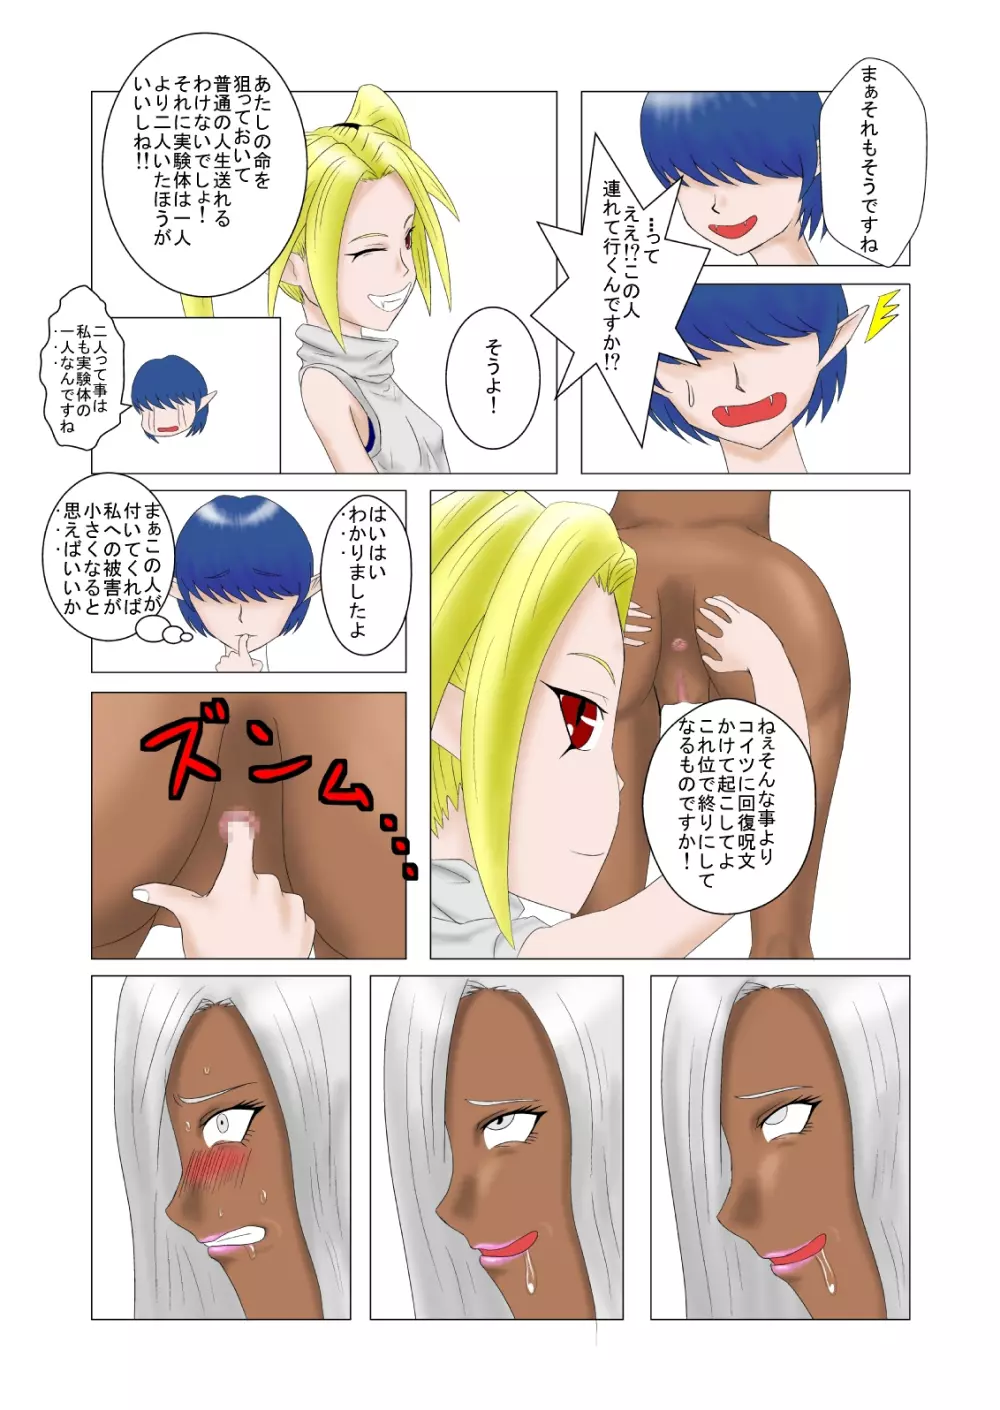 The Tales of Tickling Vol. 1 13ページ